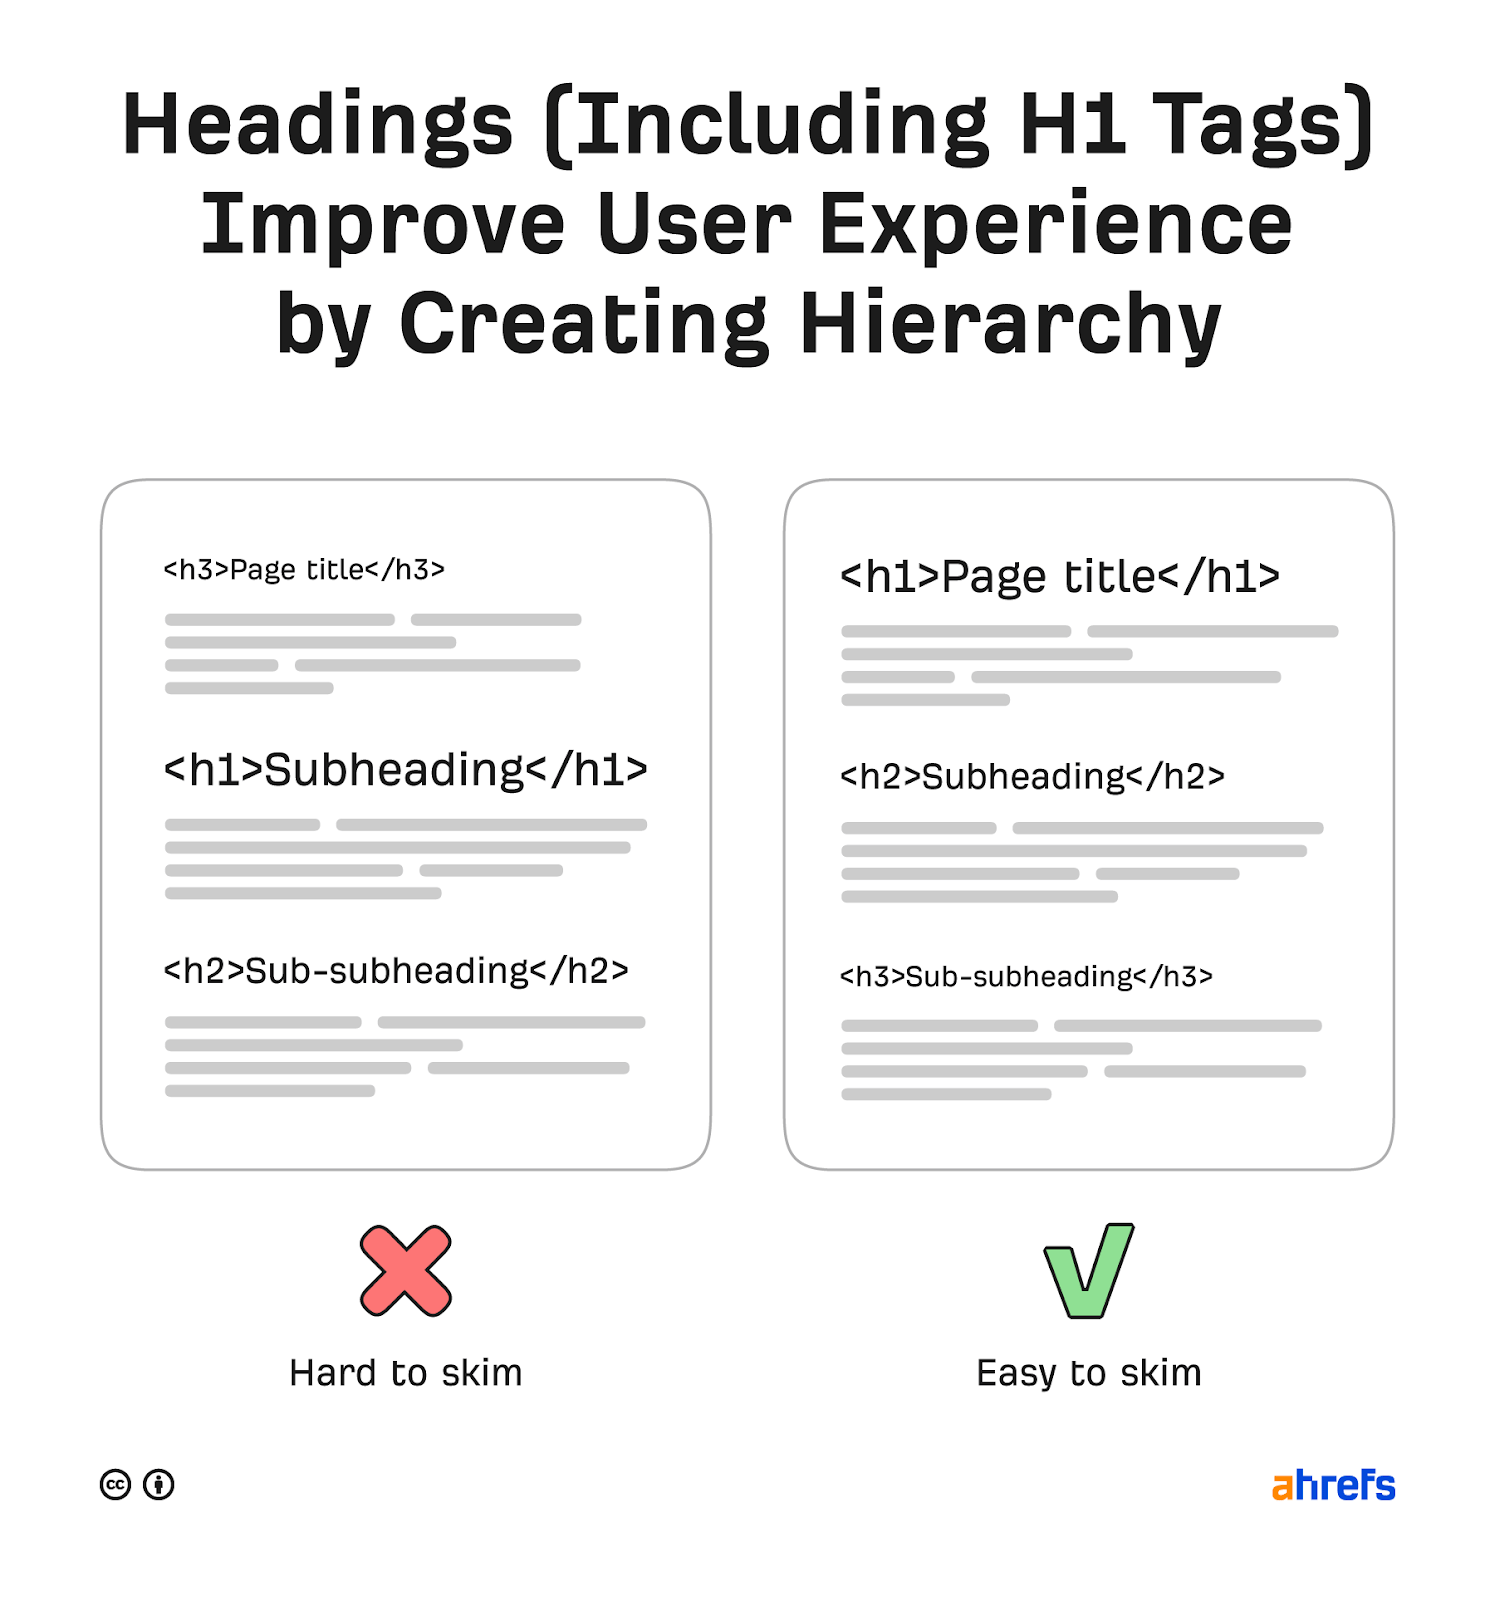 Illustration of how headings create hierarchy and improve user experience, via Ahrefs Blog